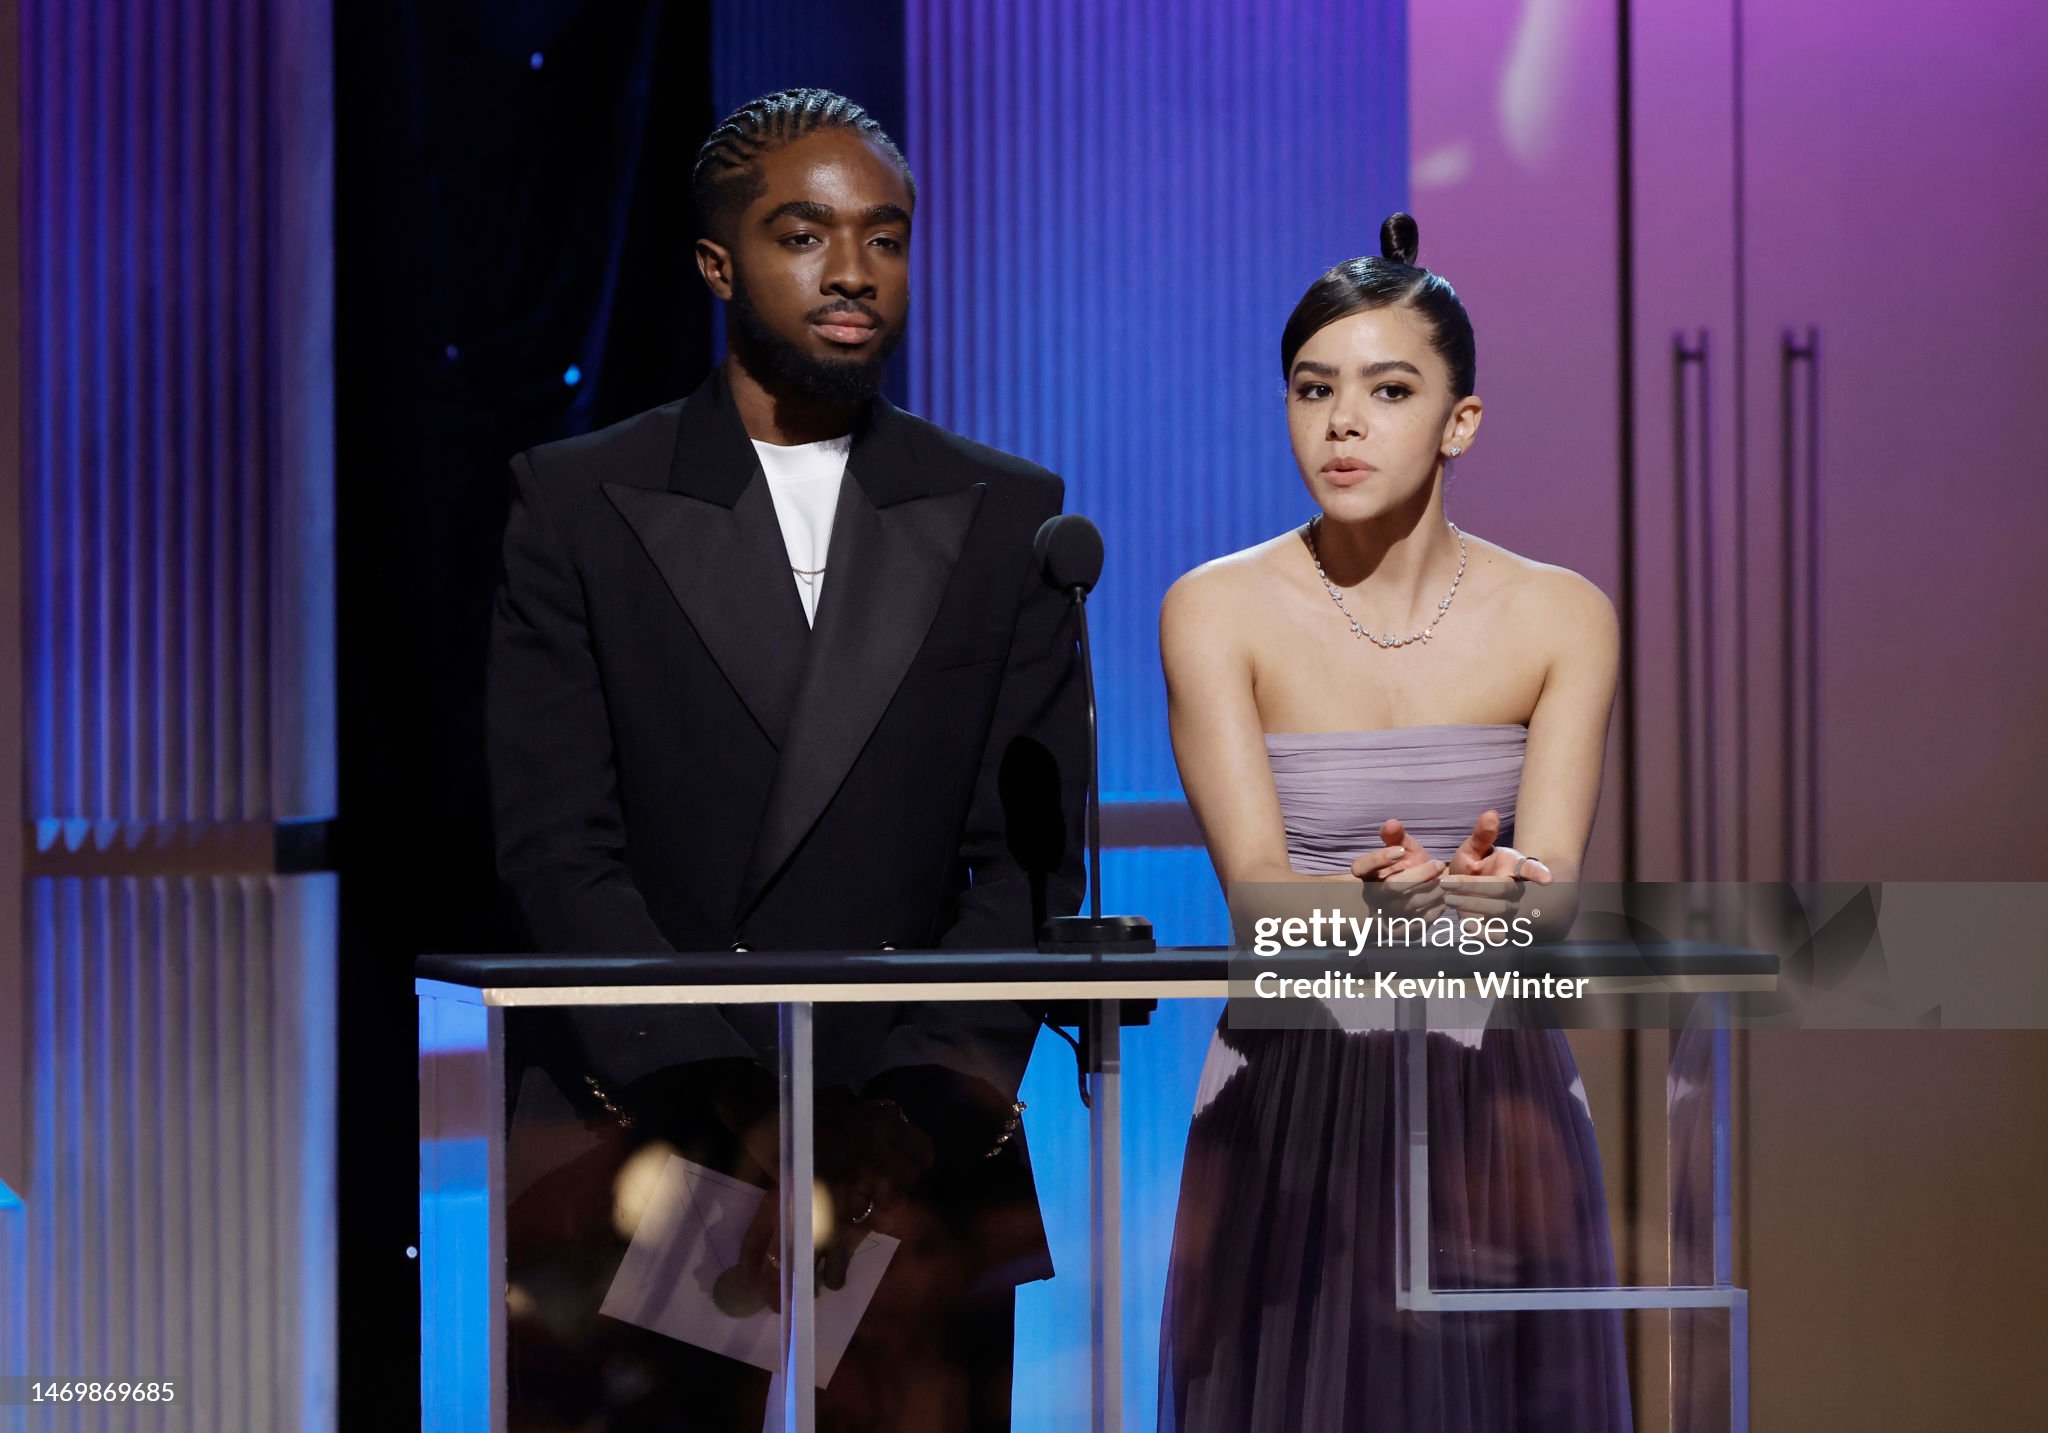 caleb-mclaughlin-and-antonia-gentry-speak-onstage-during-the-29th-annual-screen-actors-guild.jpg